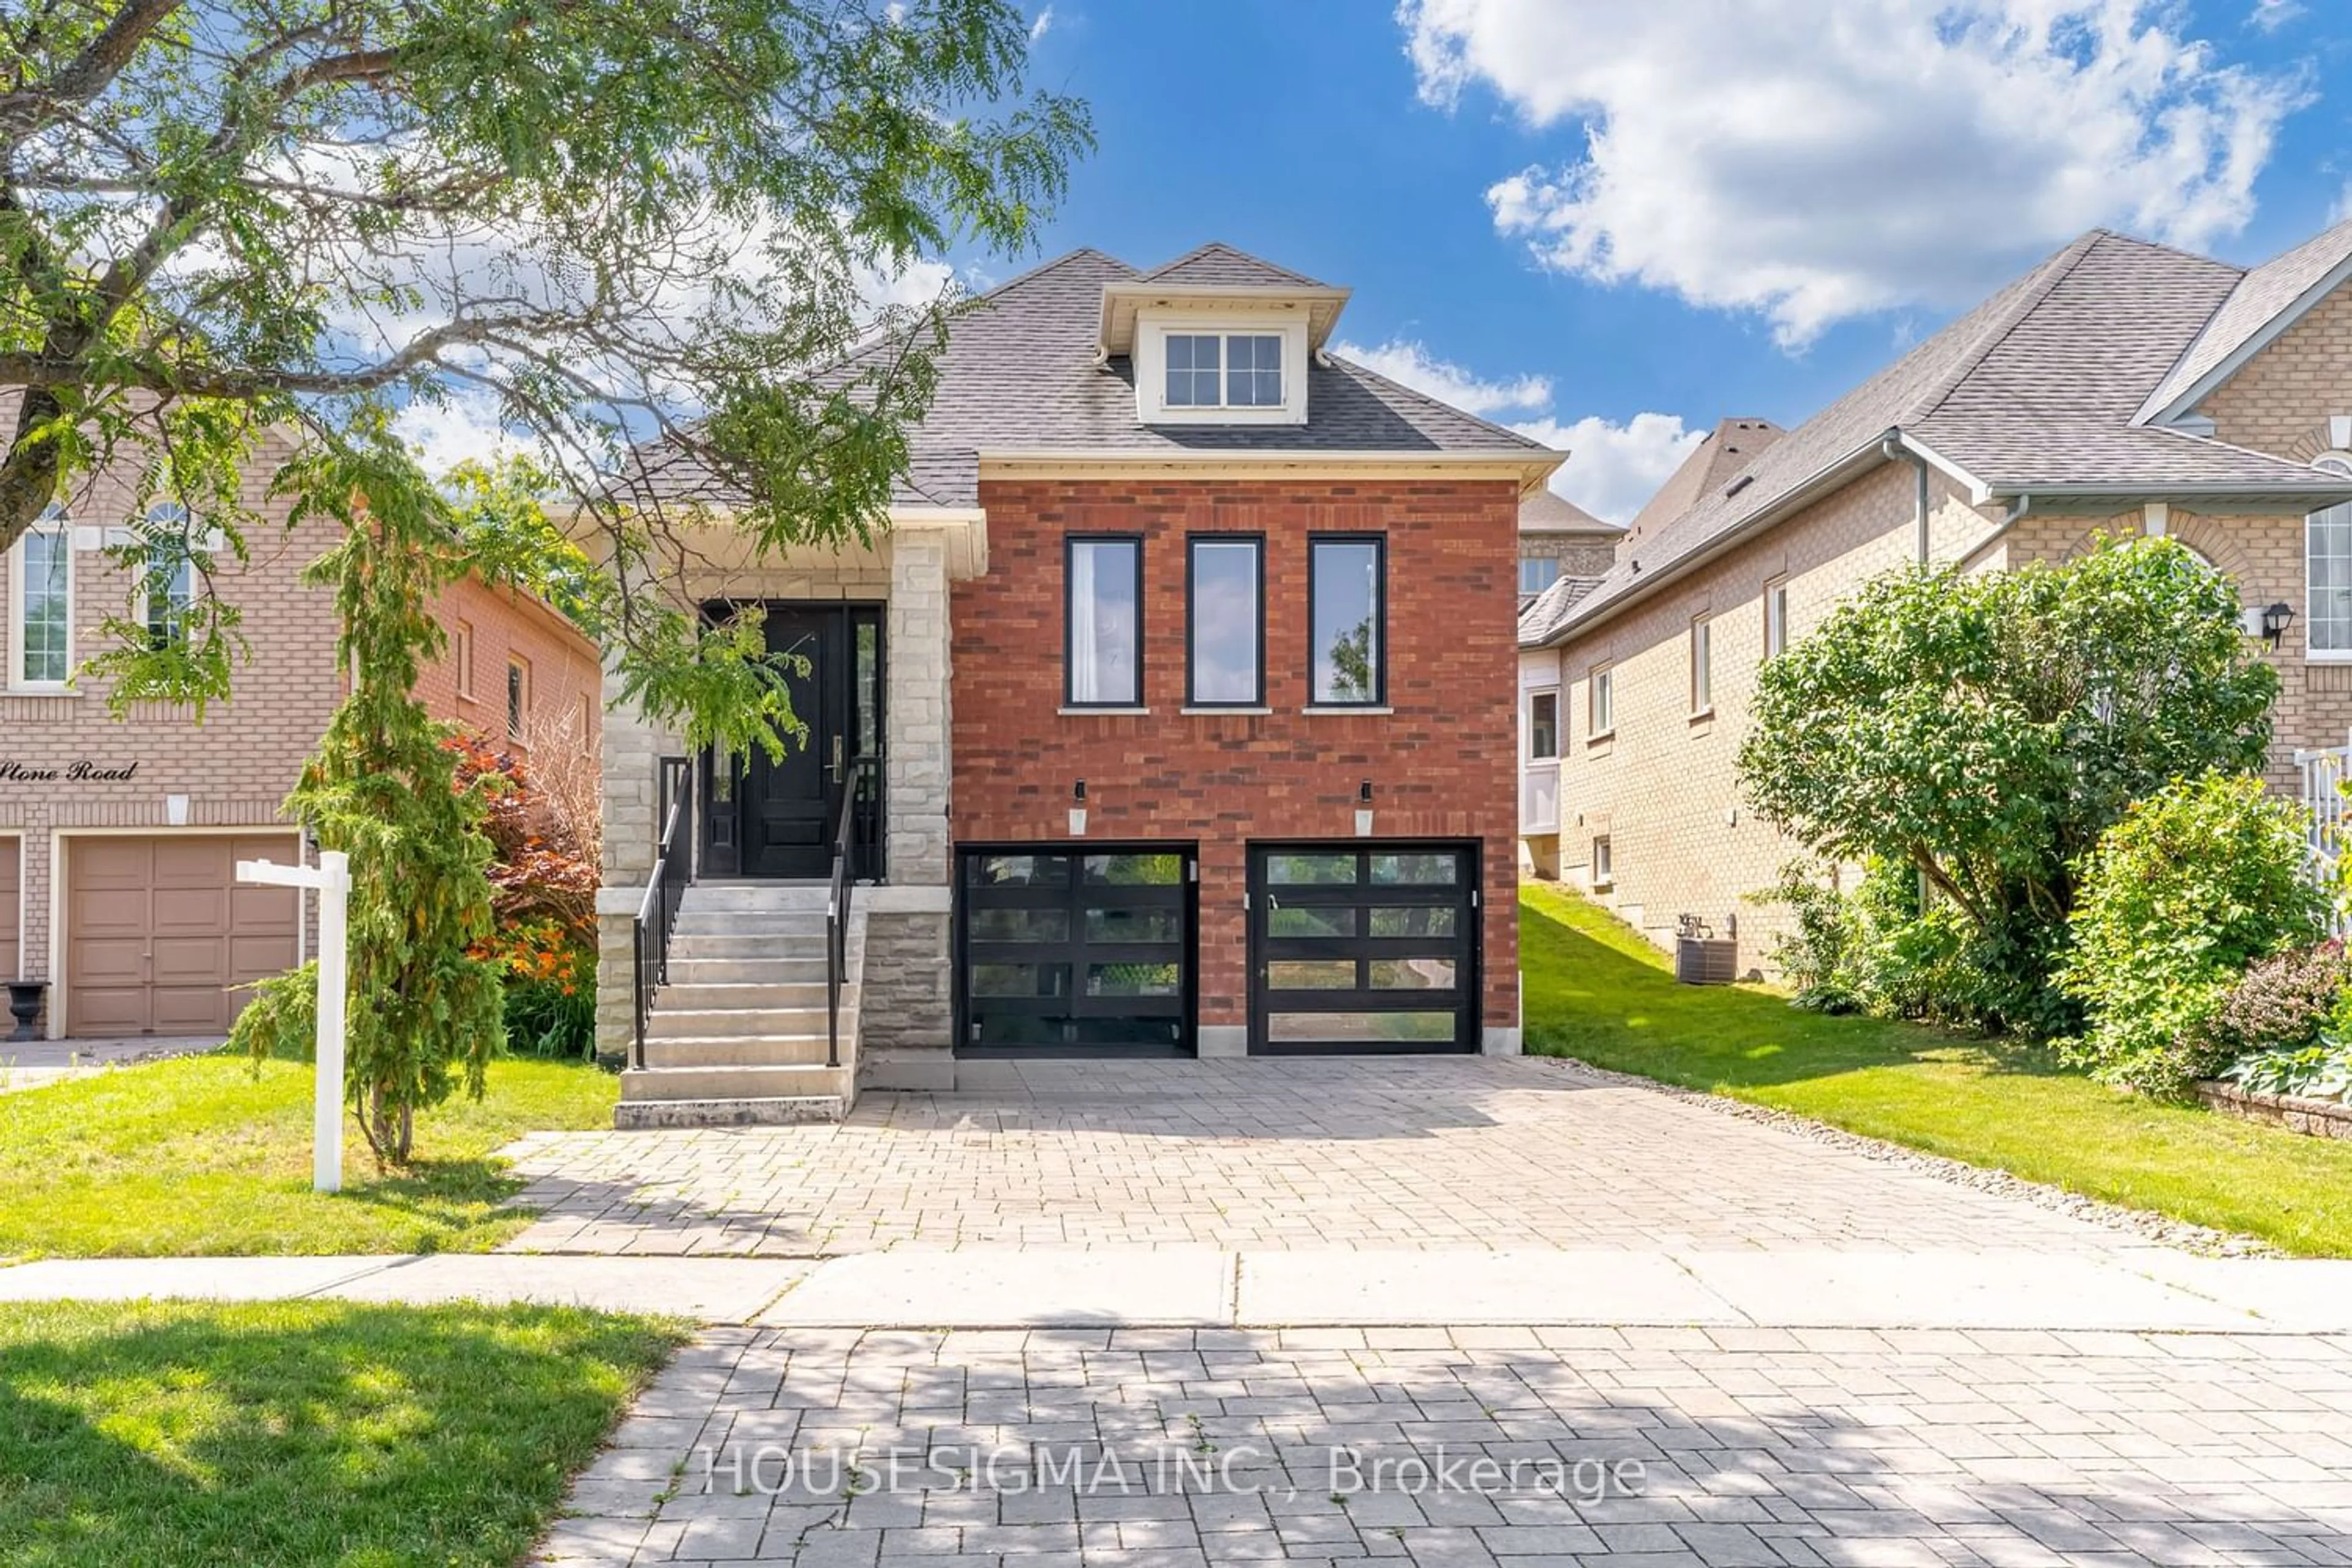 Home with brick exterior material for 512 Stone Rd, Aurora Ontario L4G 6Z7